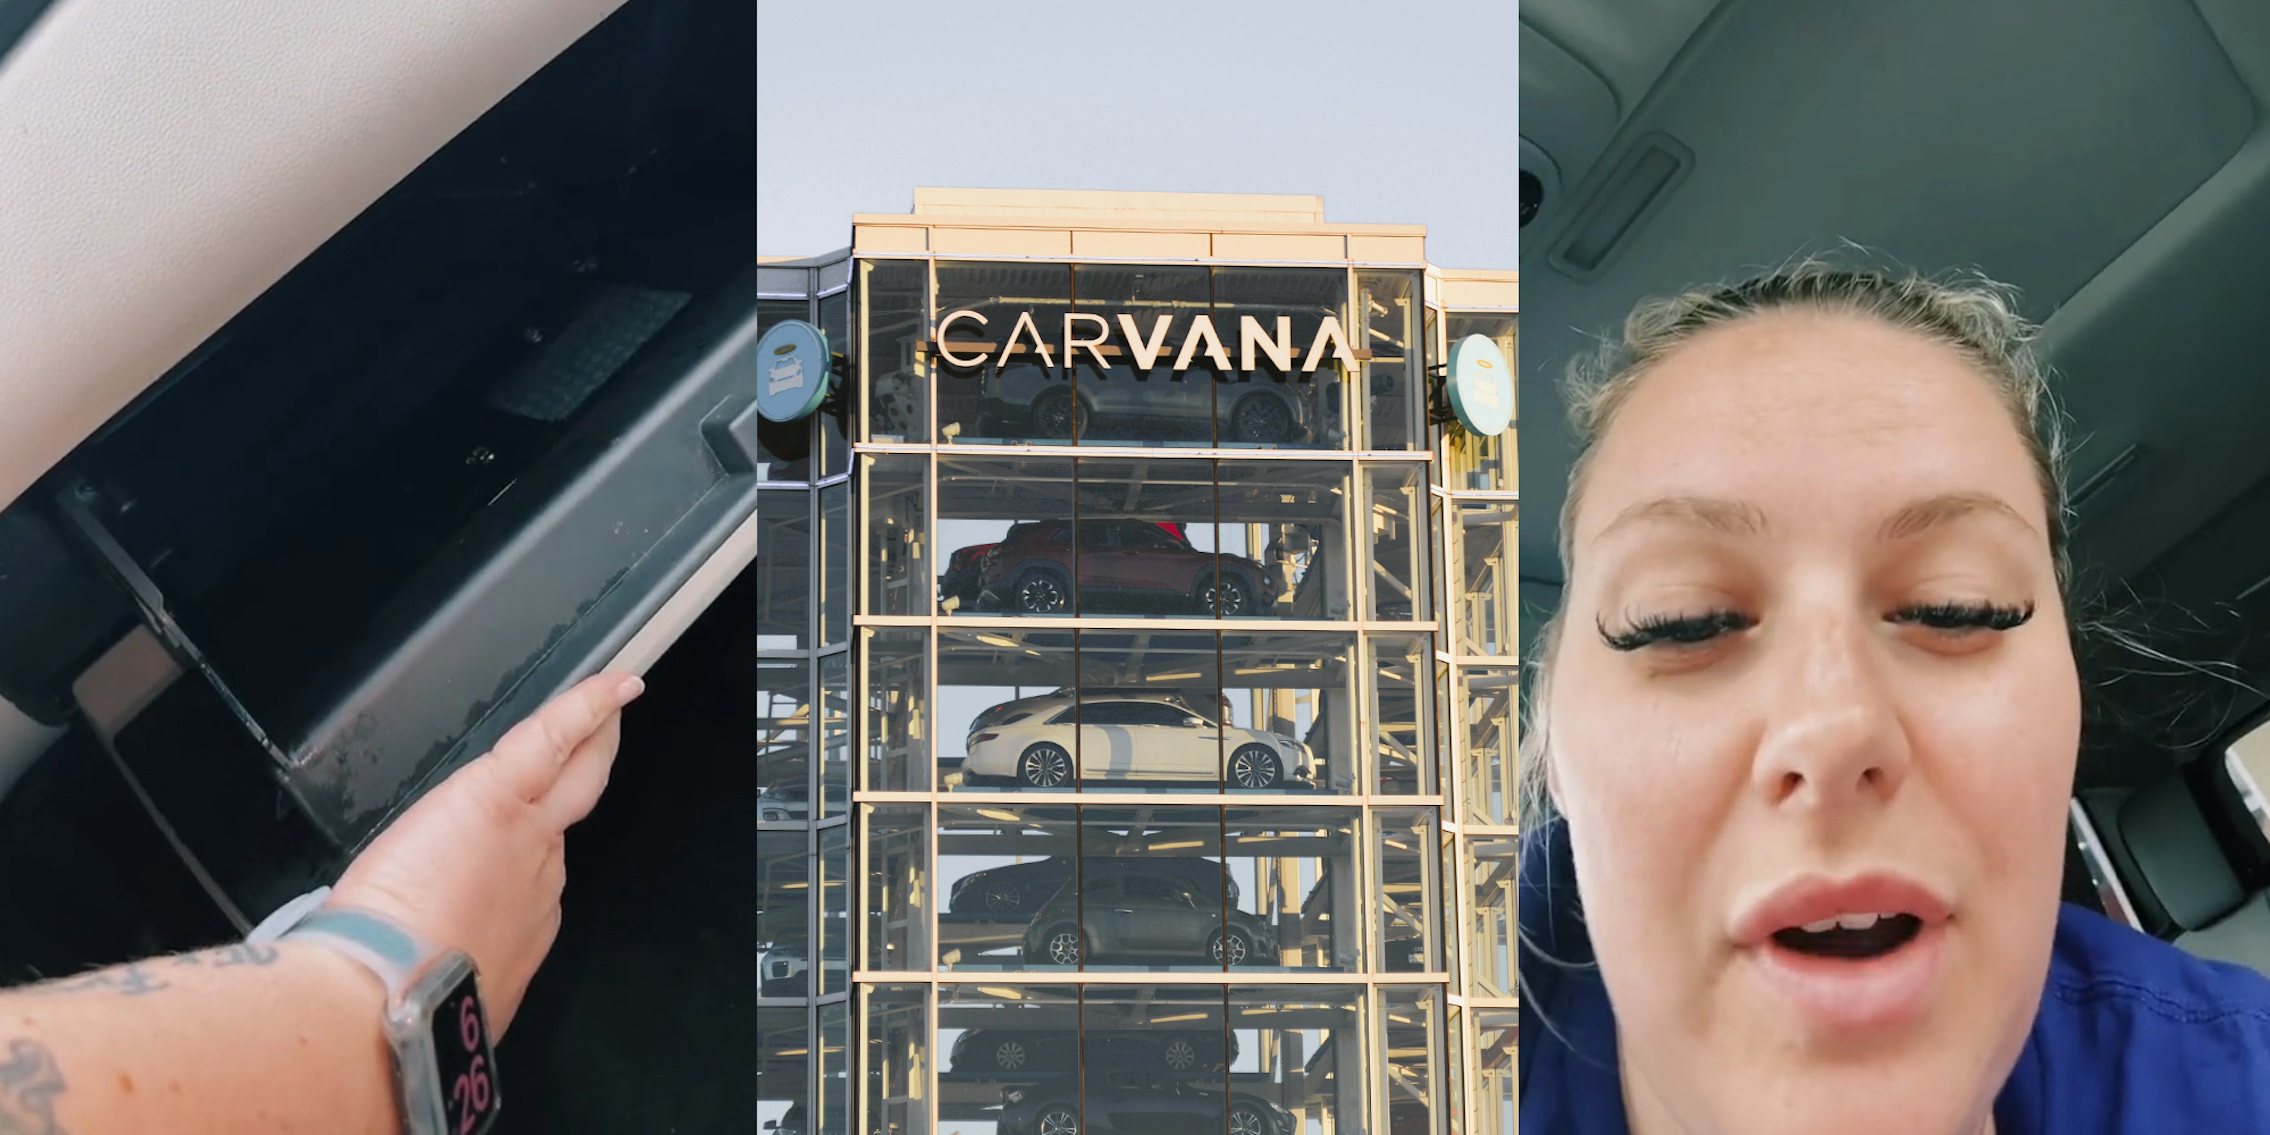 Carvana customer opening car glove compartment to reveal that it's full of water (l) Carvana sign on glass vending tower (c) Carvana customer speaking in car (r)